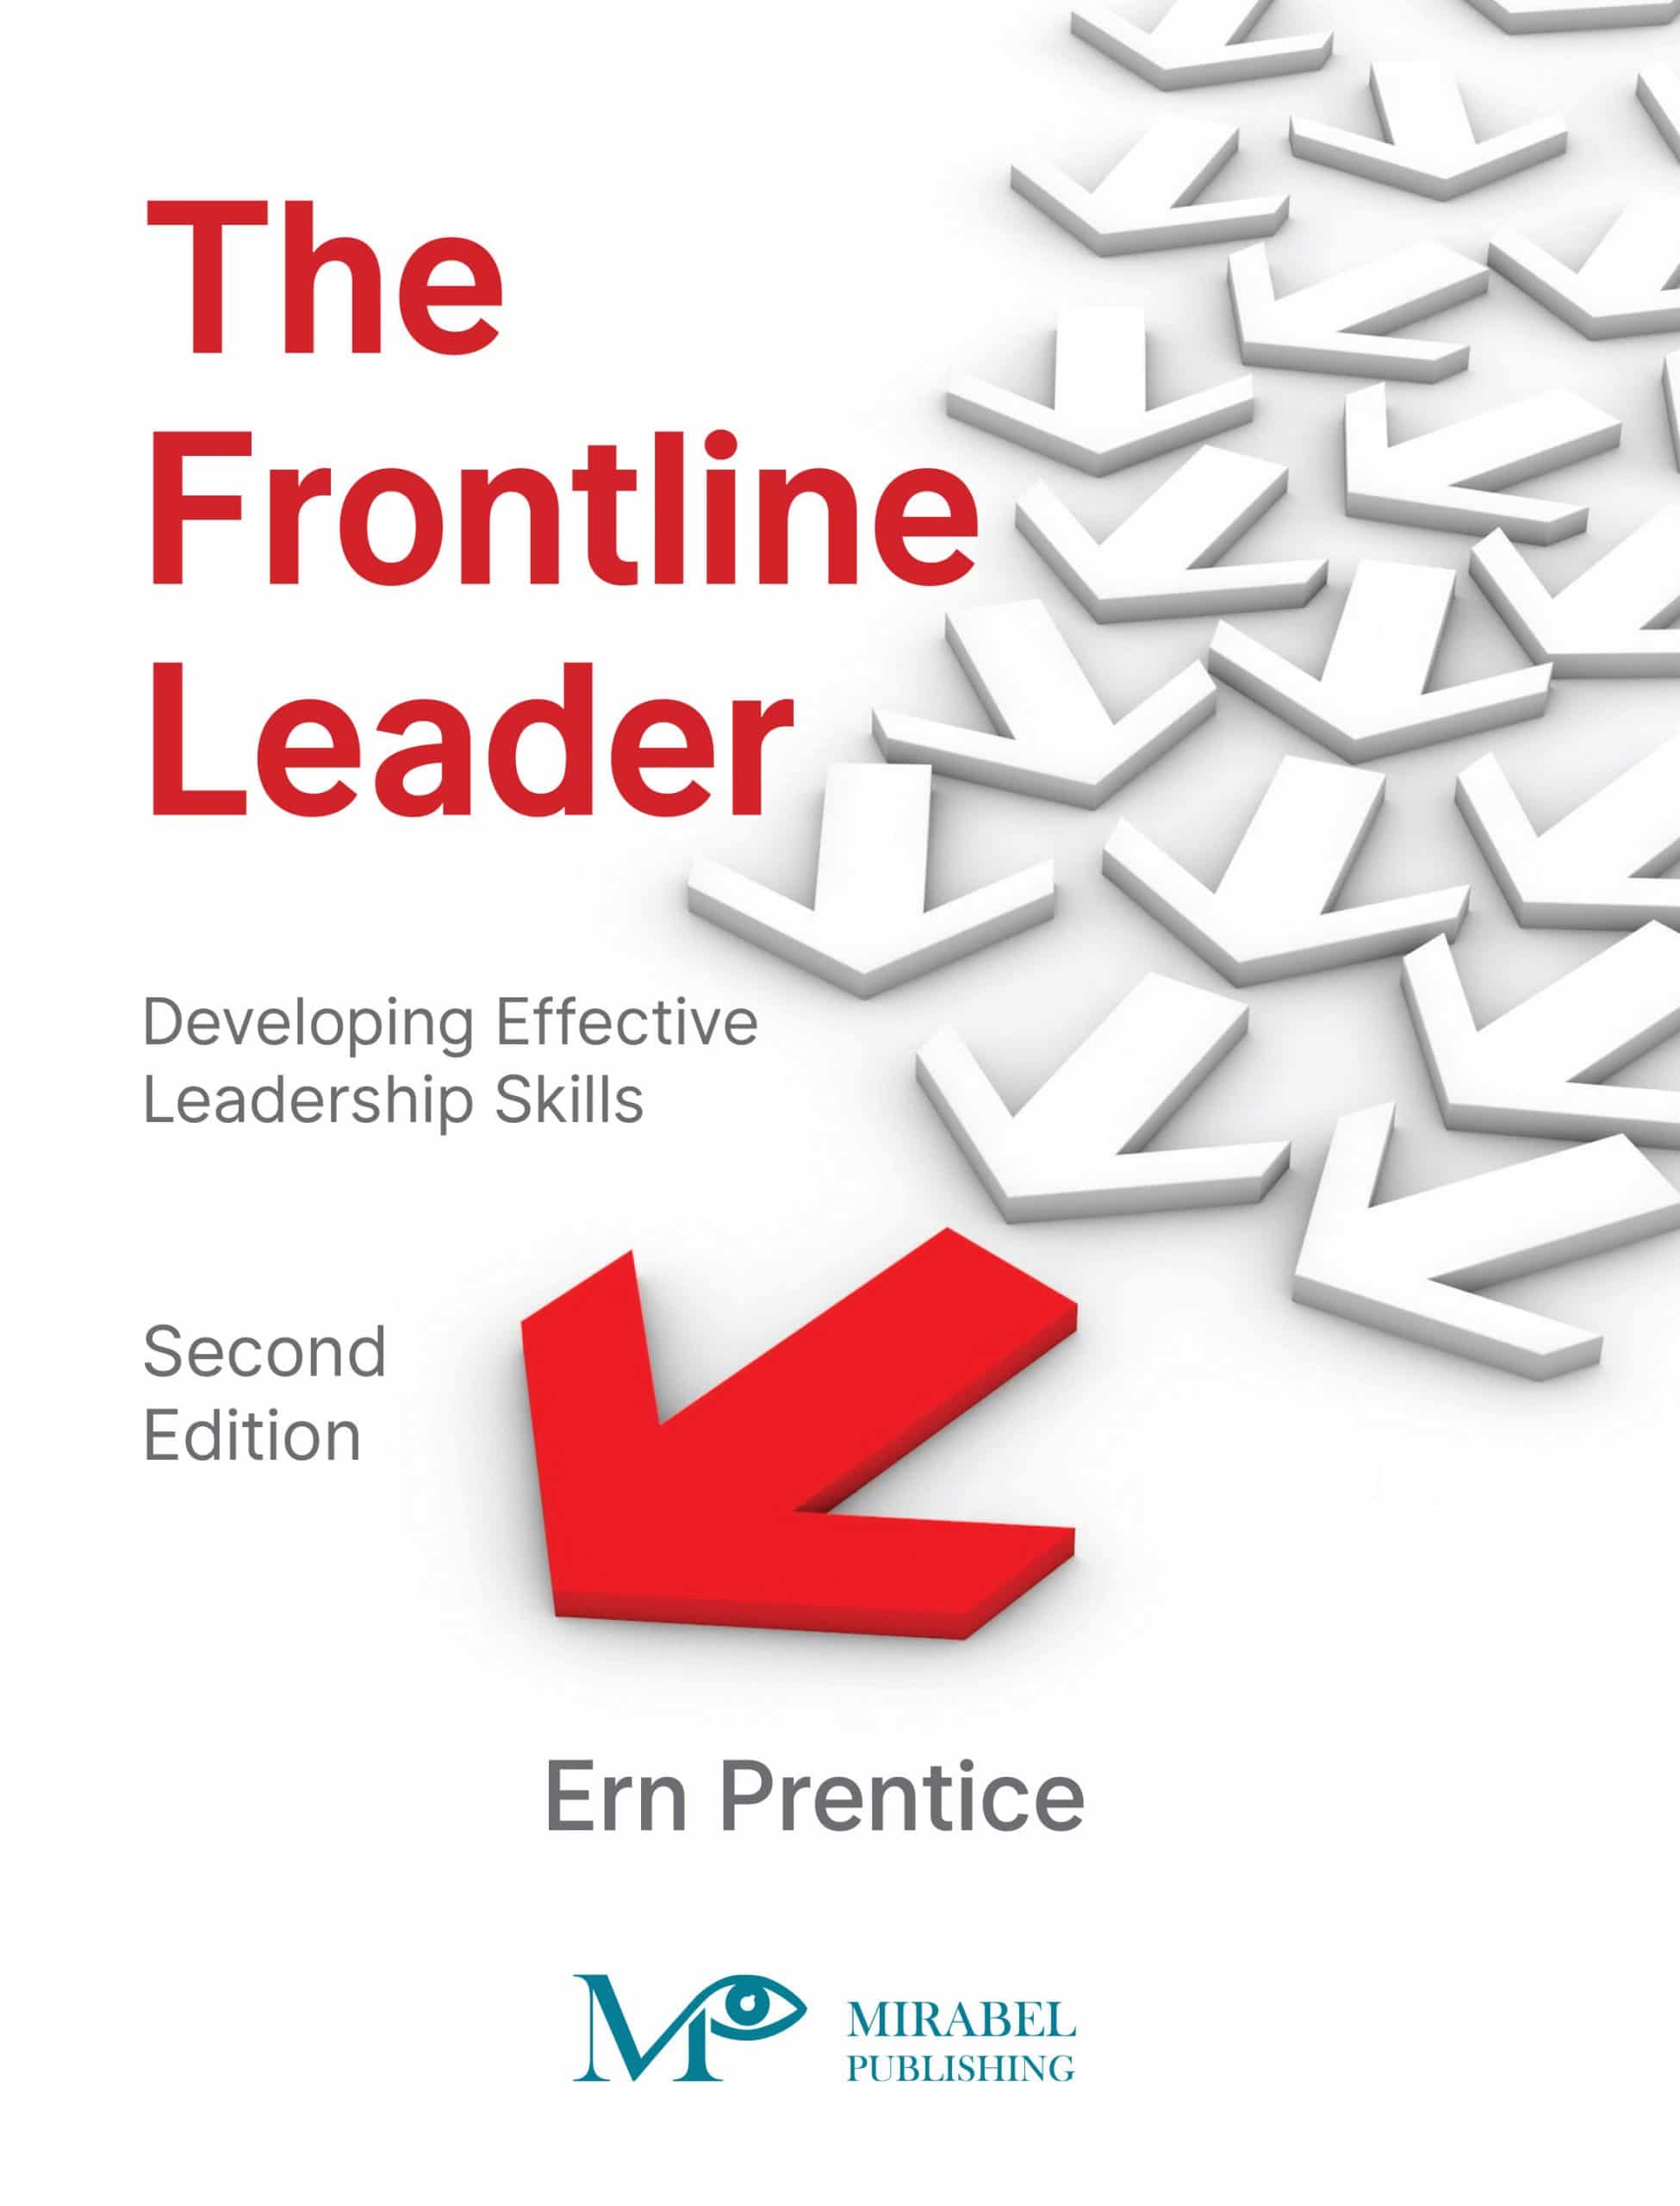 The Frontline Leader (Second Edition)